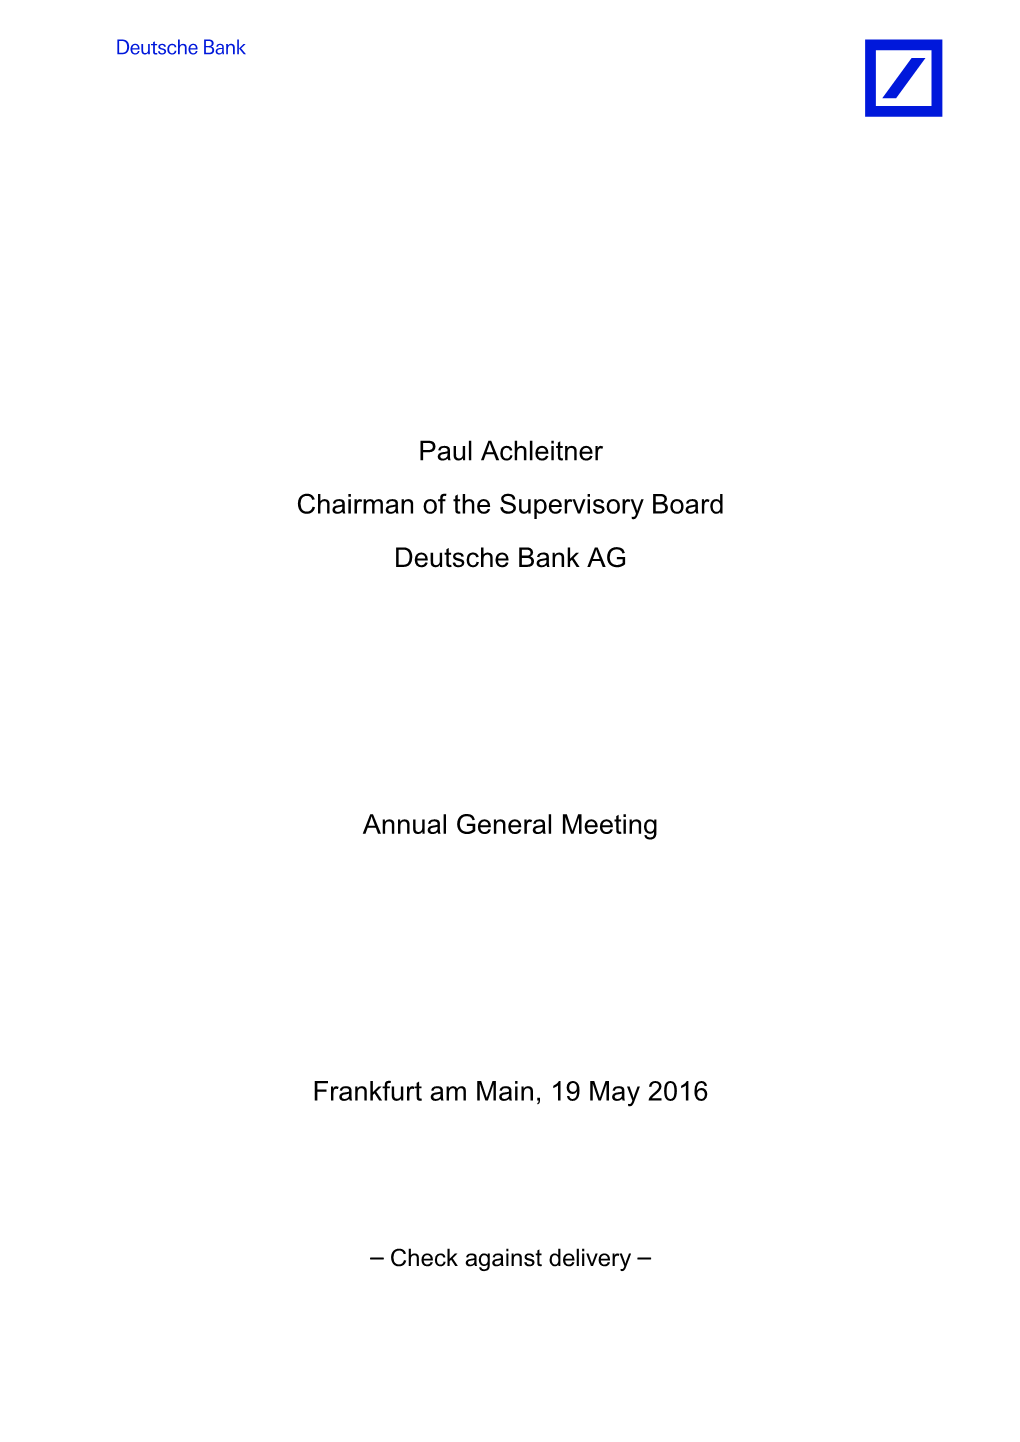 Paul Achleitner Chairman of the Supervisory Board Deutsche Bank AG